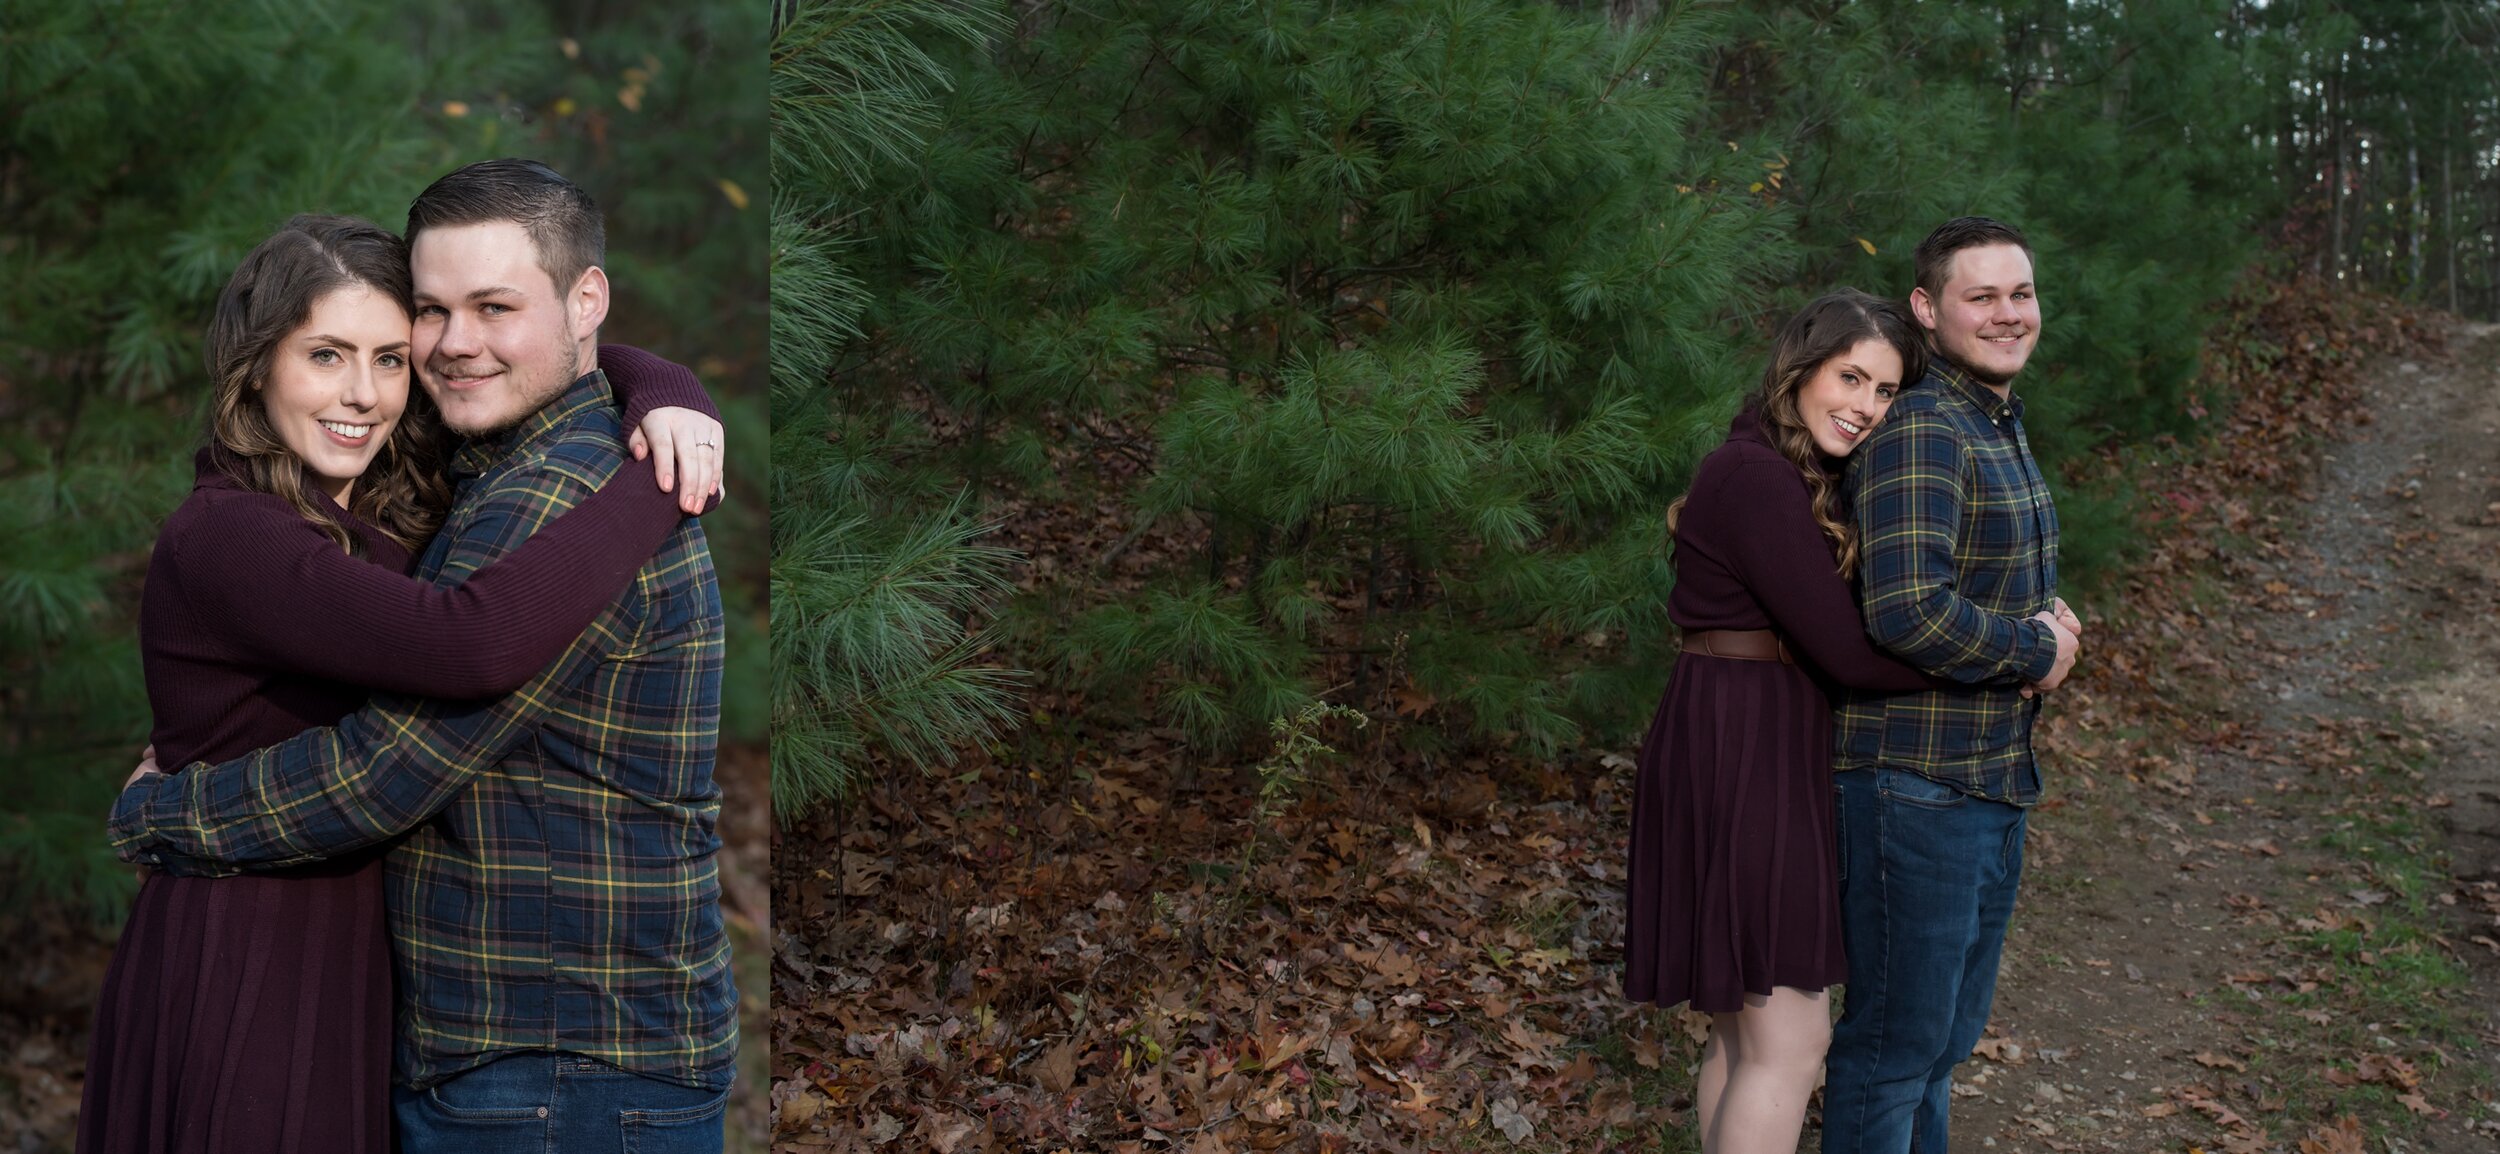 Maureen Russell Photography - Wrentham MA Fall Engagement Session_0004.jpg